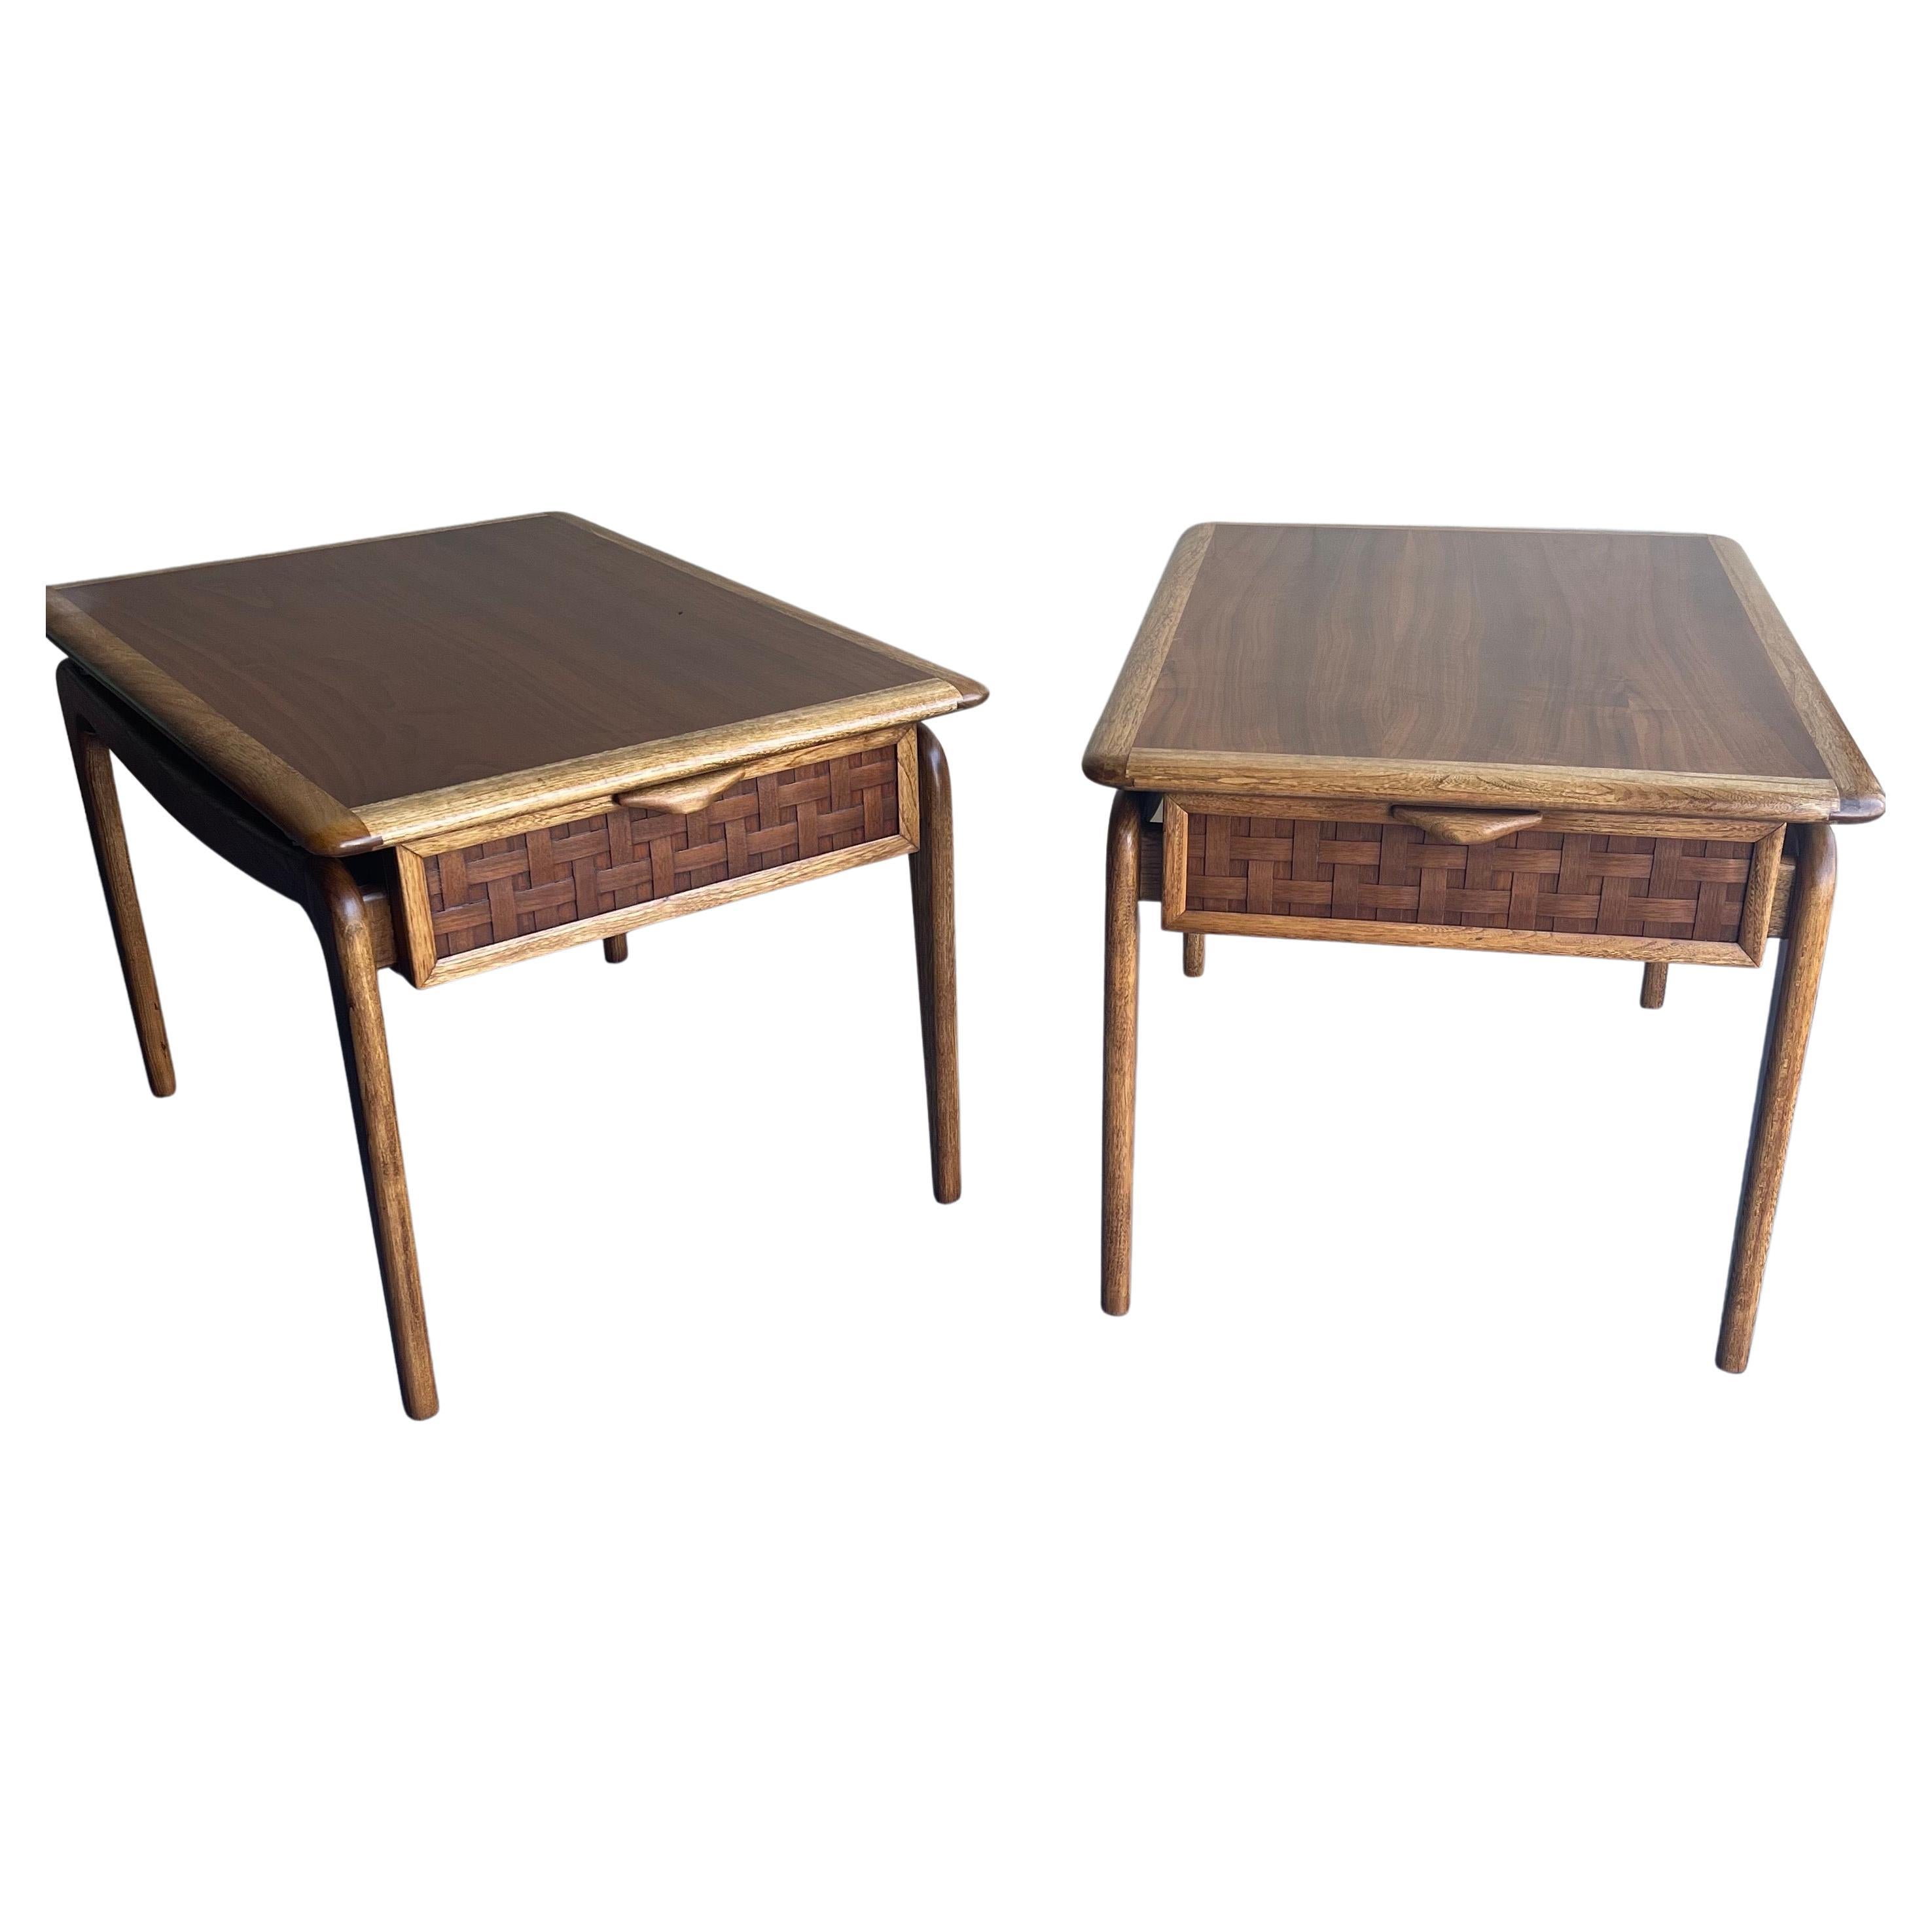 A very nice pair of American modern walnut with oak accent end tables from the 